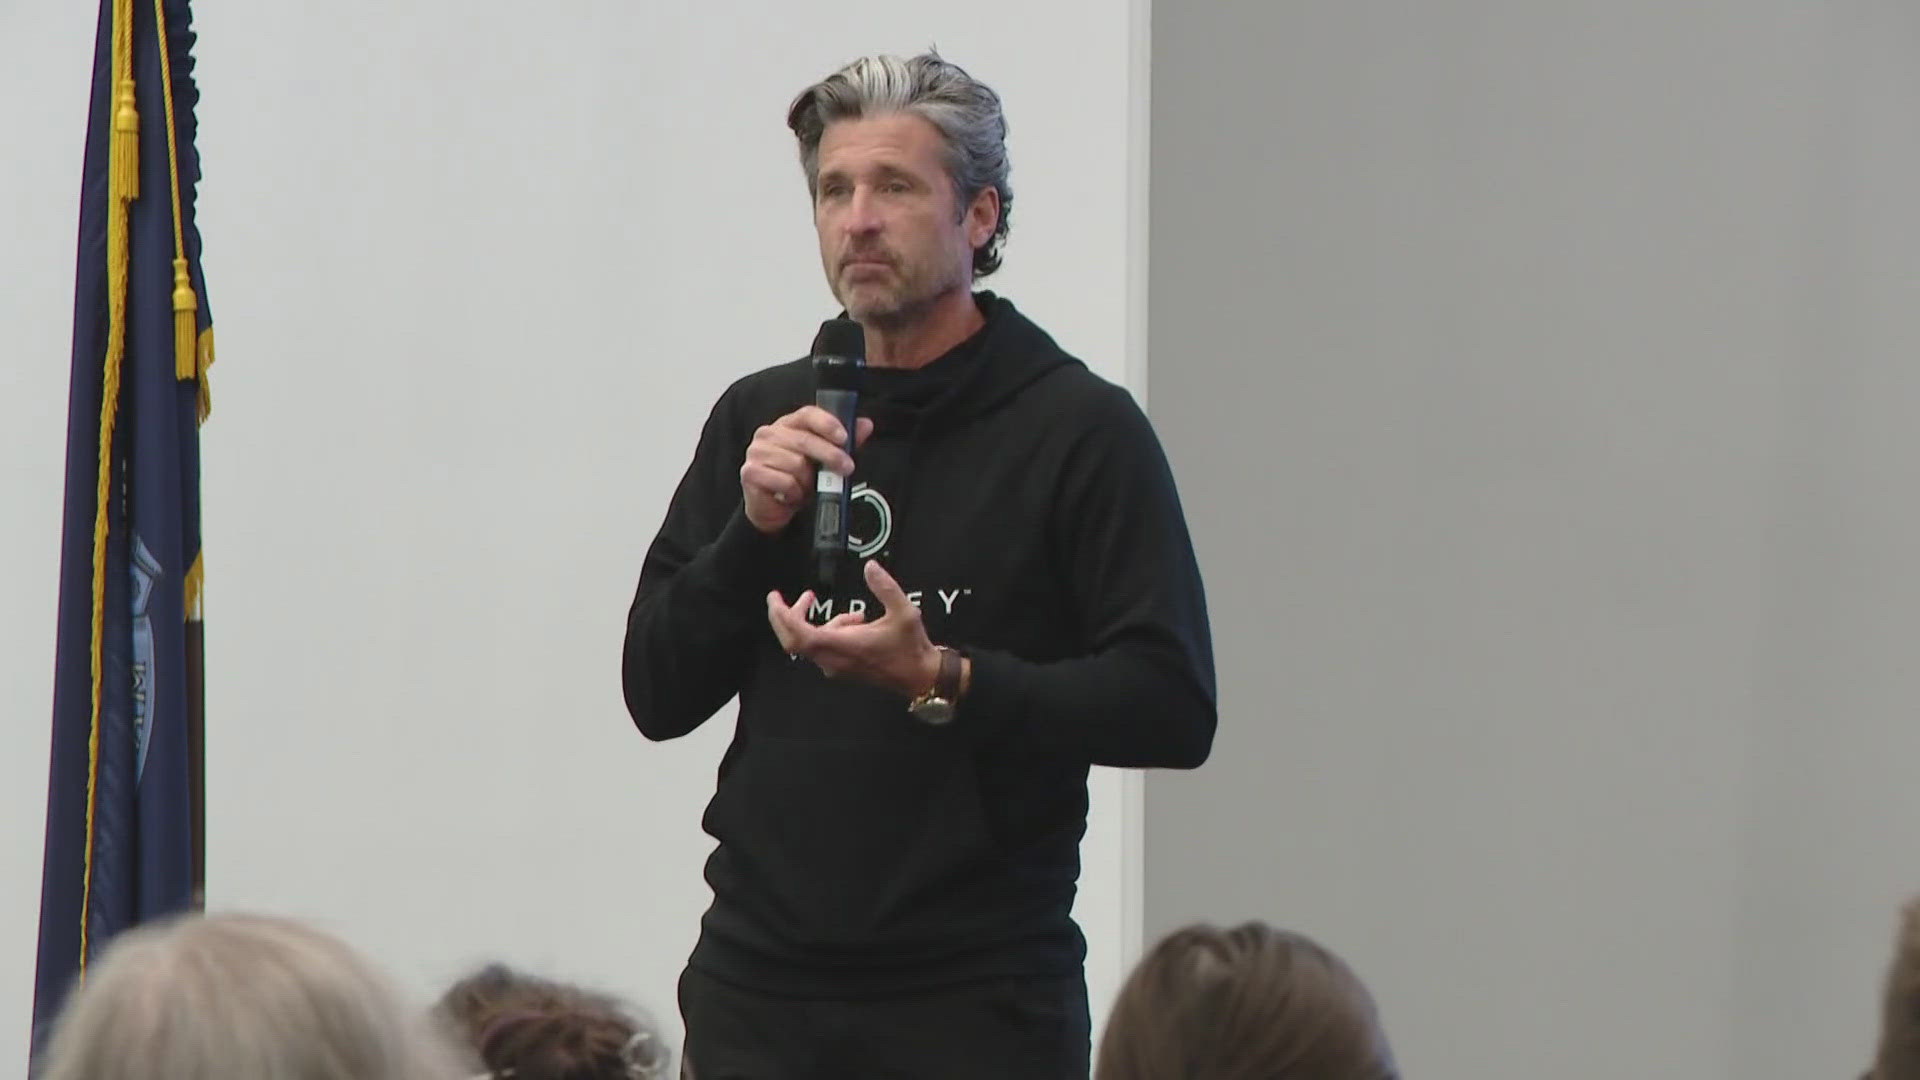 Unum will be this year's presenting sponsor for the Dempsey Center's 5K Run/Walk. Maine native and actor Patrick Dempsey stopped by Unum to receive the donation.